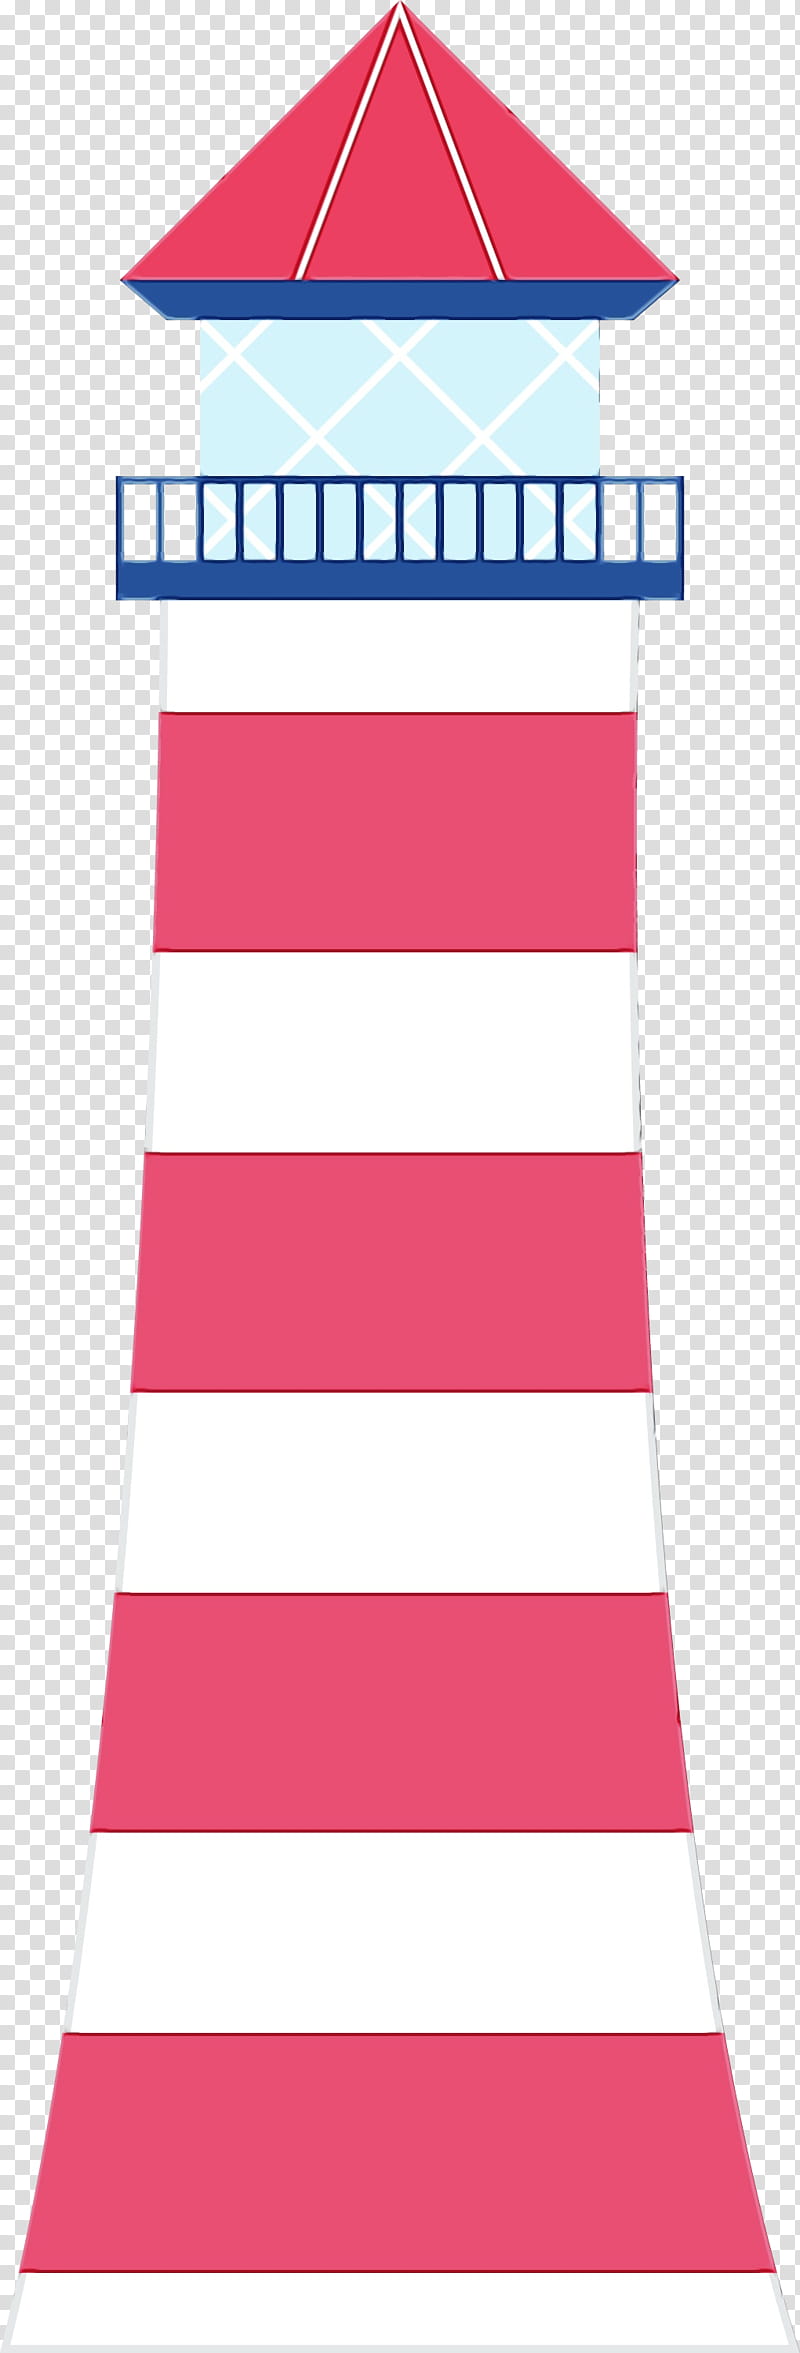 Pink, Lighthouse, Drawing, Seamanship, Sailor, Silhouette, Maritime Transport, Theme transparent background PNG clipart